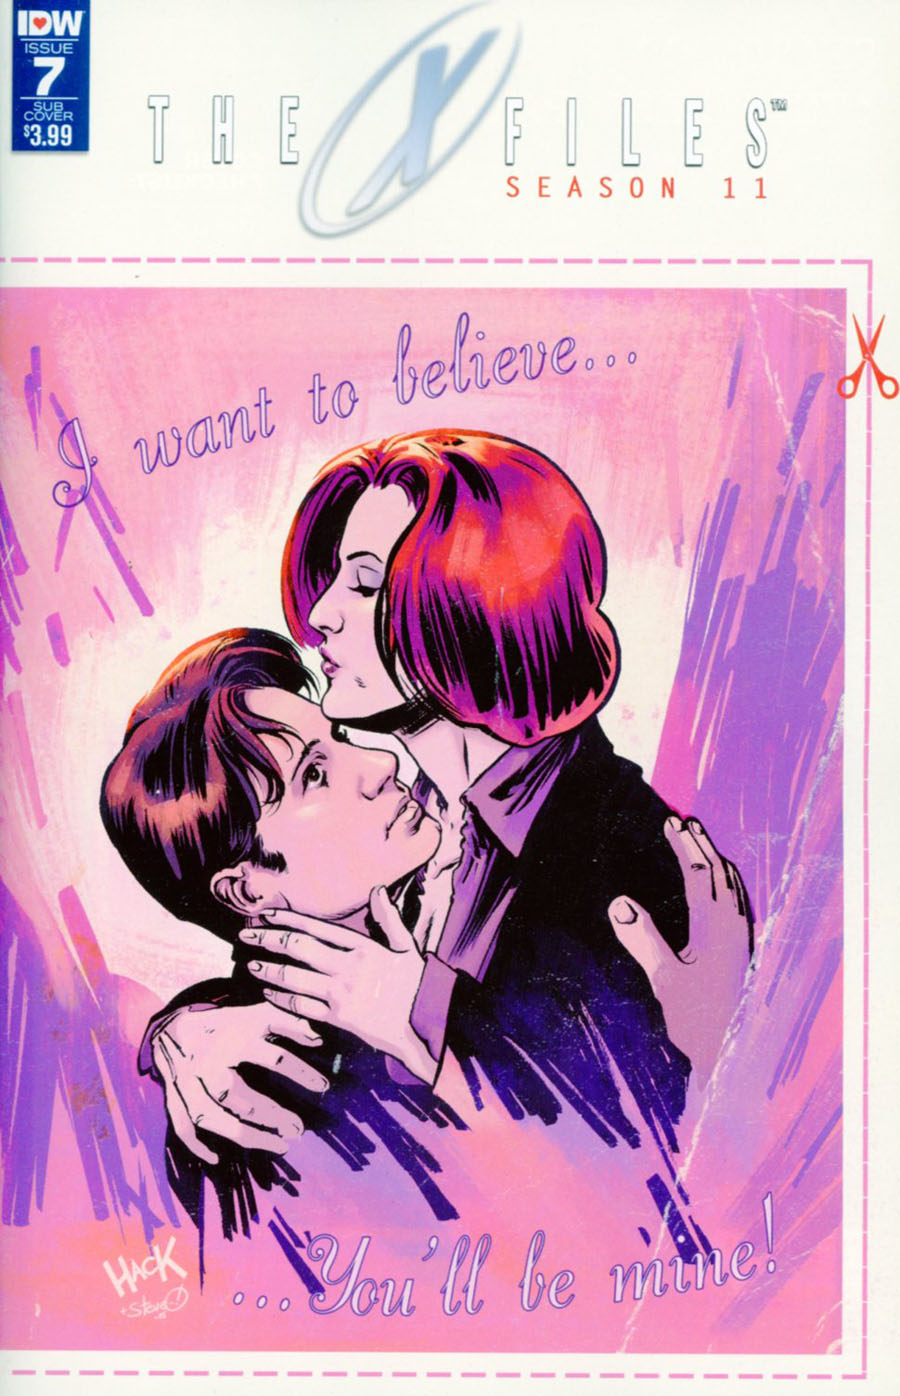 X-Files Season 11 #7 Cover C Variant Robert Hack Valentines Day Card Cover